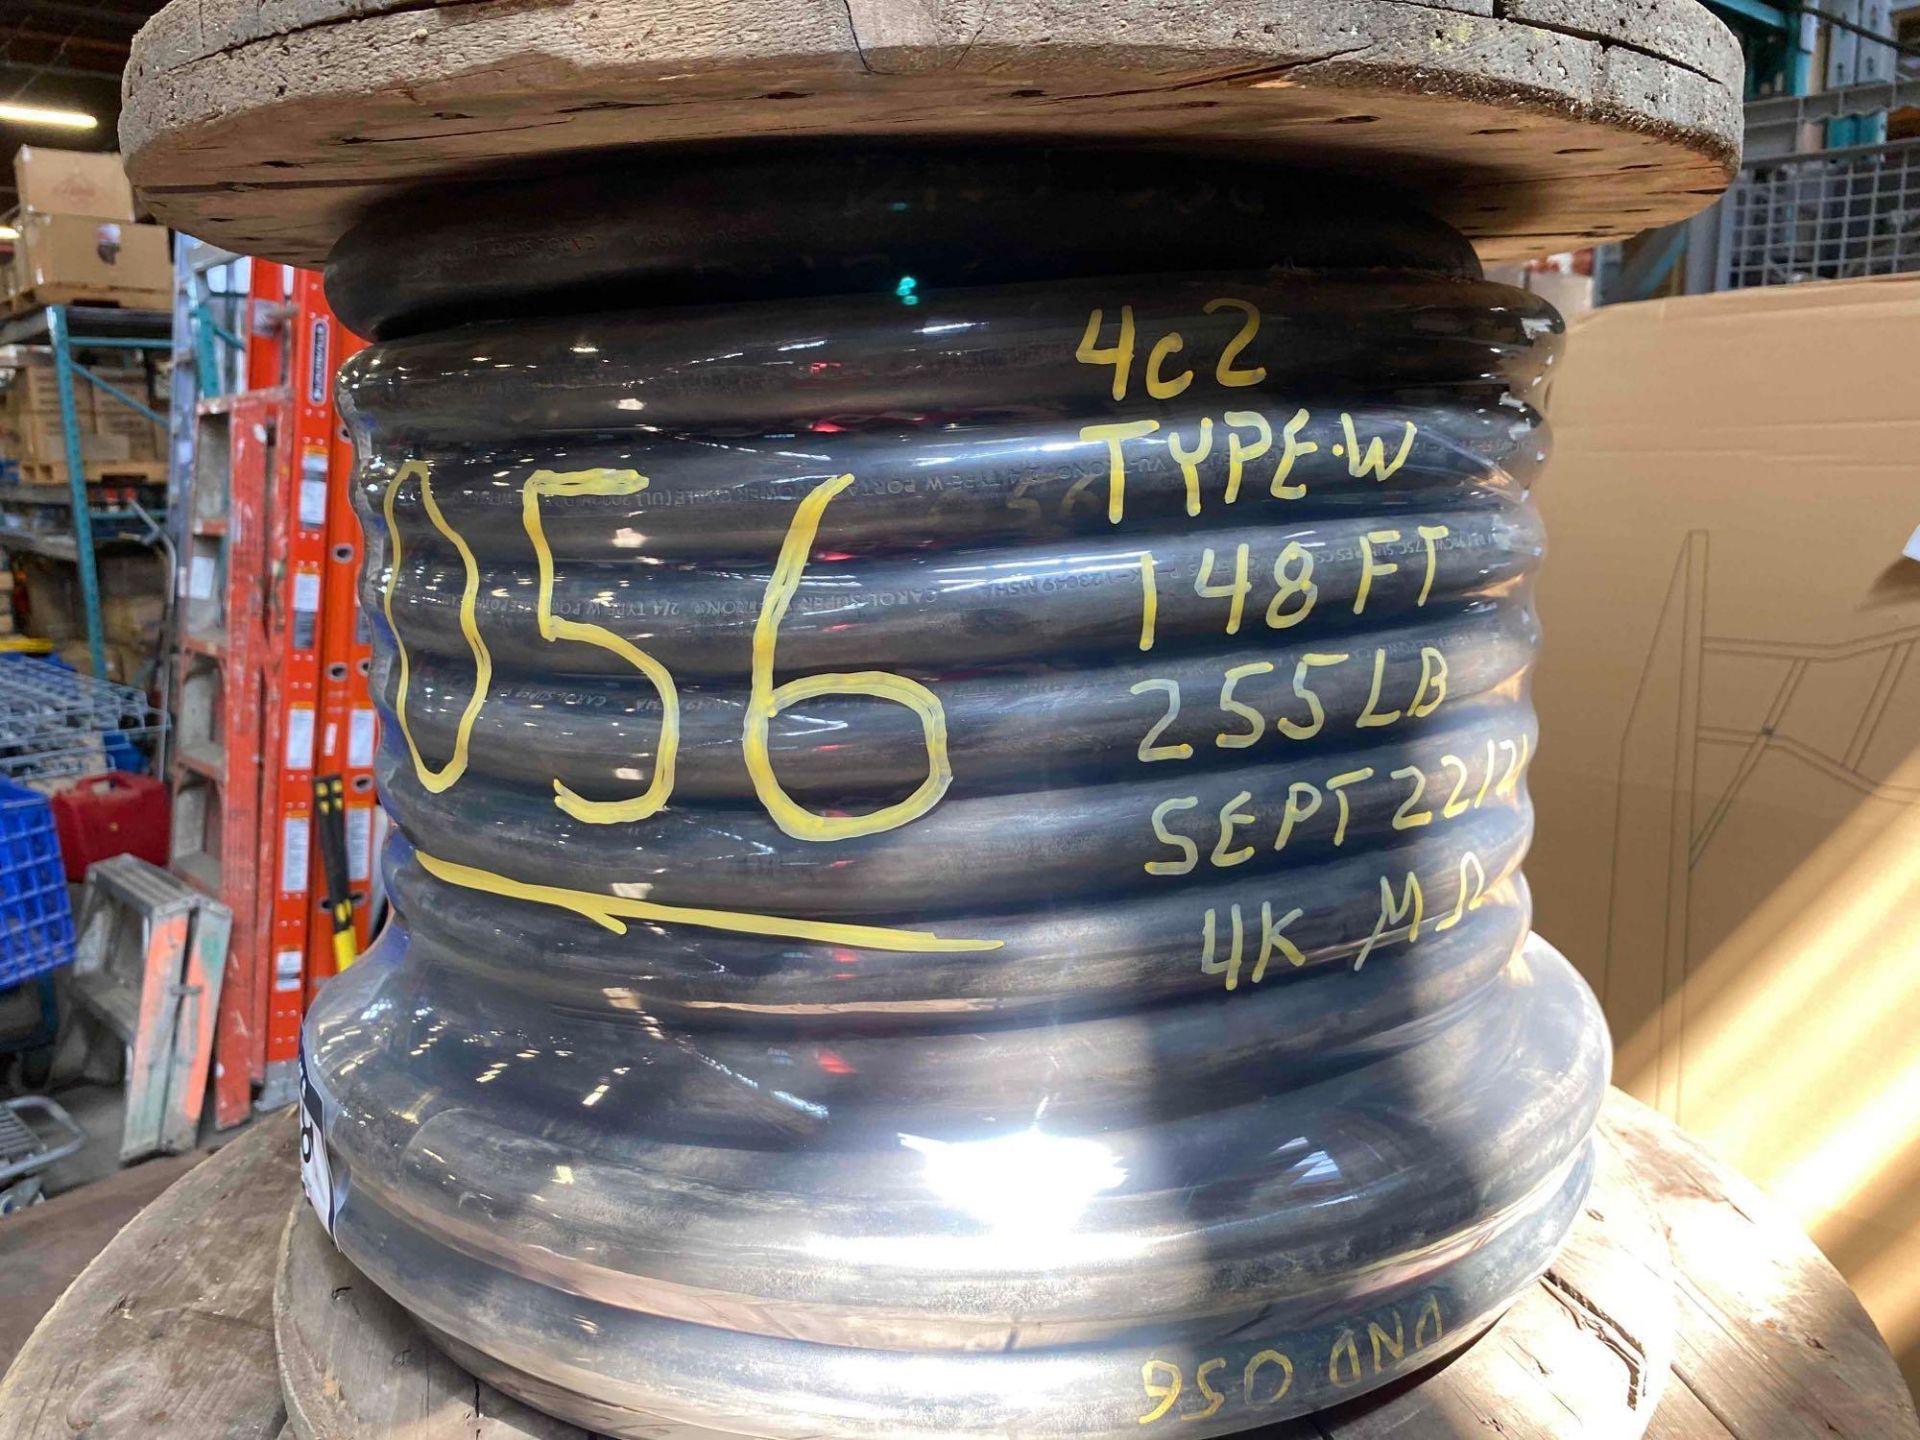 Spool of 148' of 4C #2 Type W Wire - Image 3 of 3